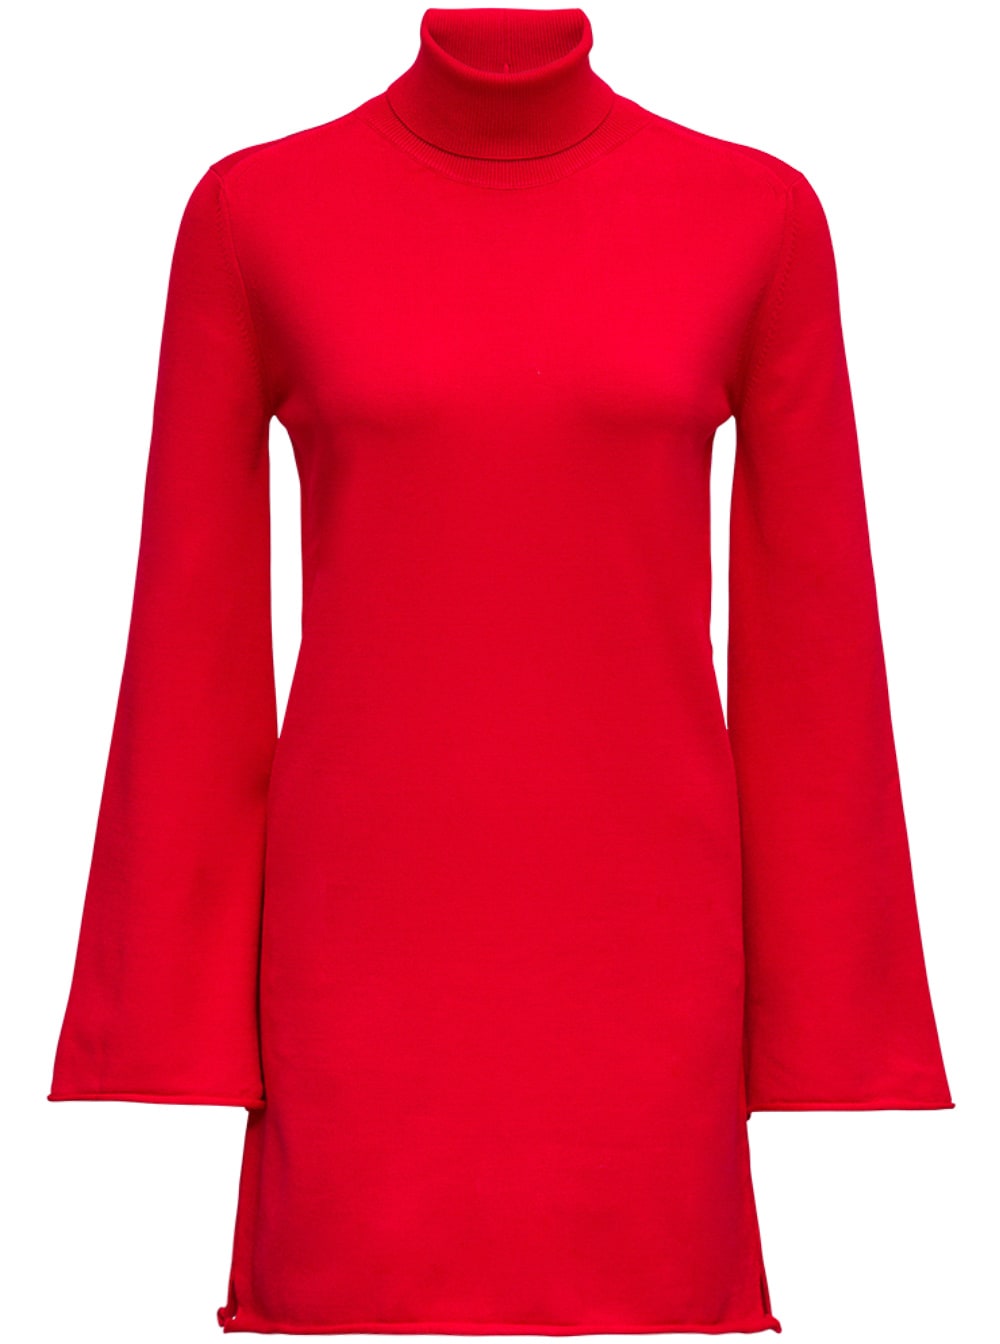 SEMICOUTURE Red Viscose Blend Damienne Dress With Oversized Long Sleeves